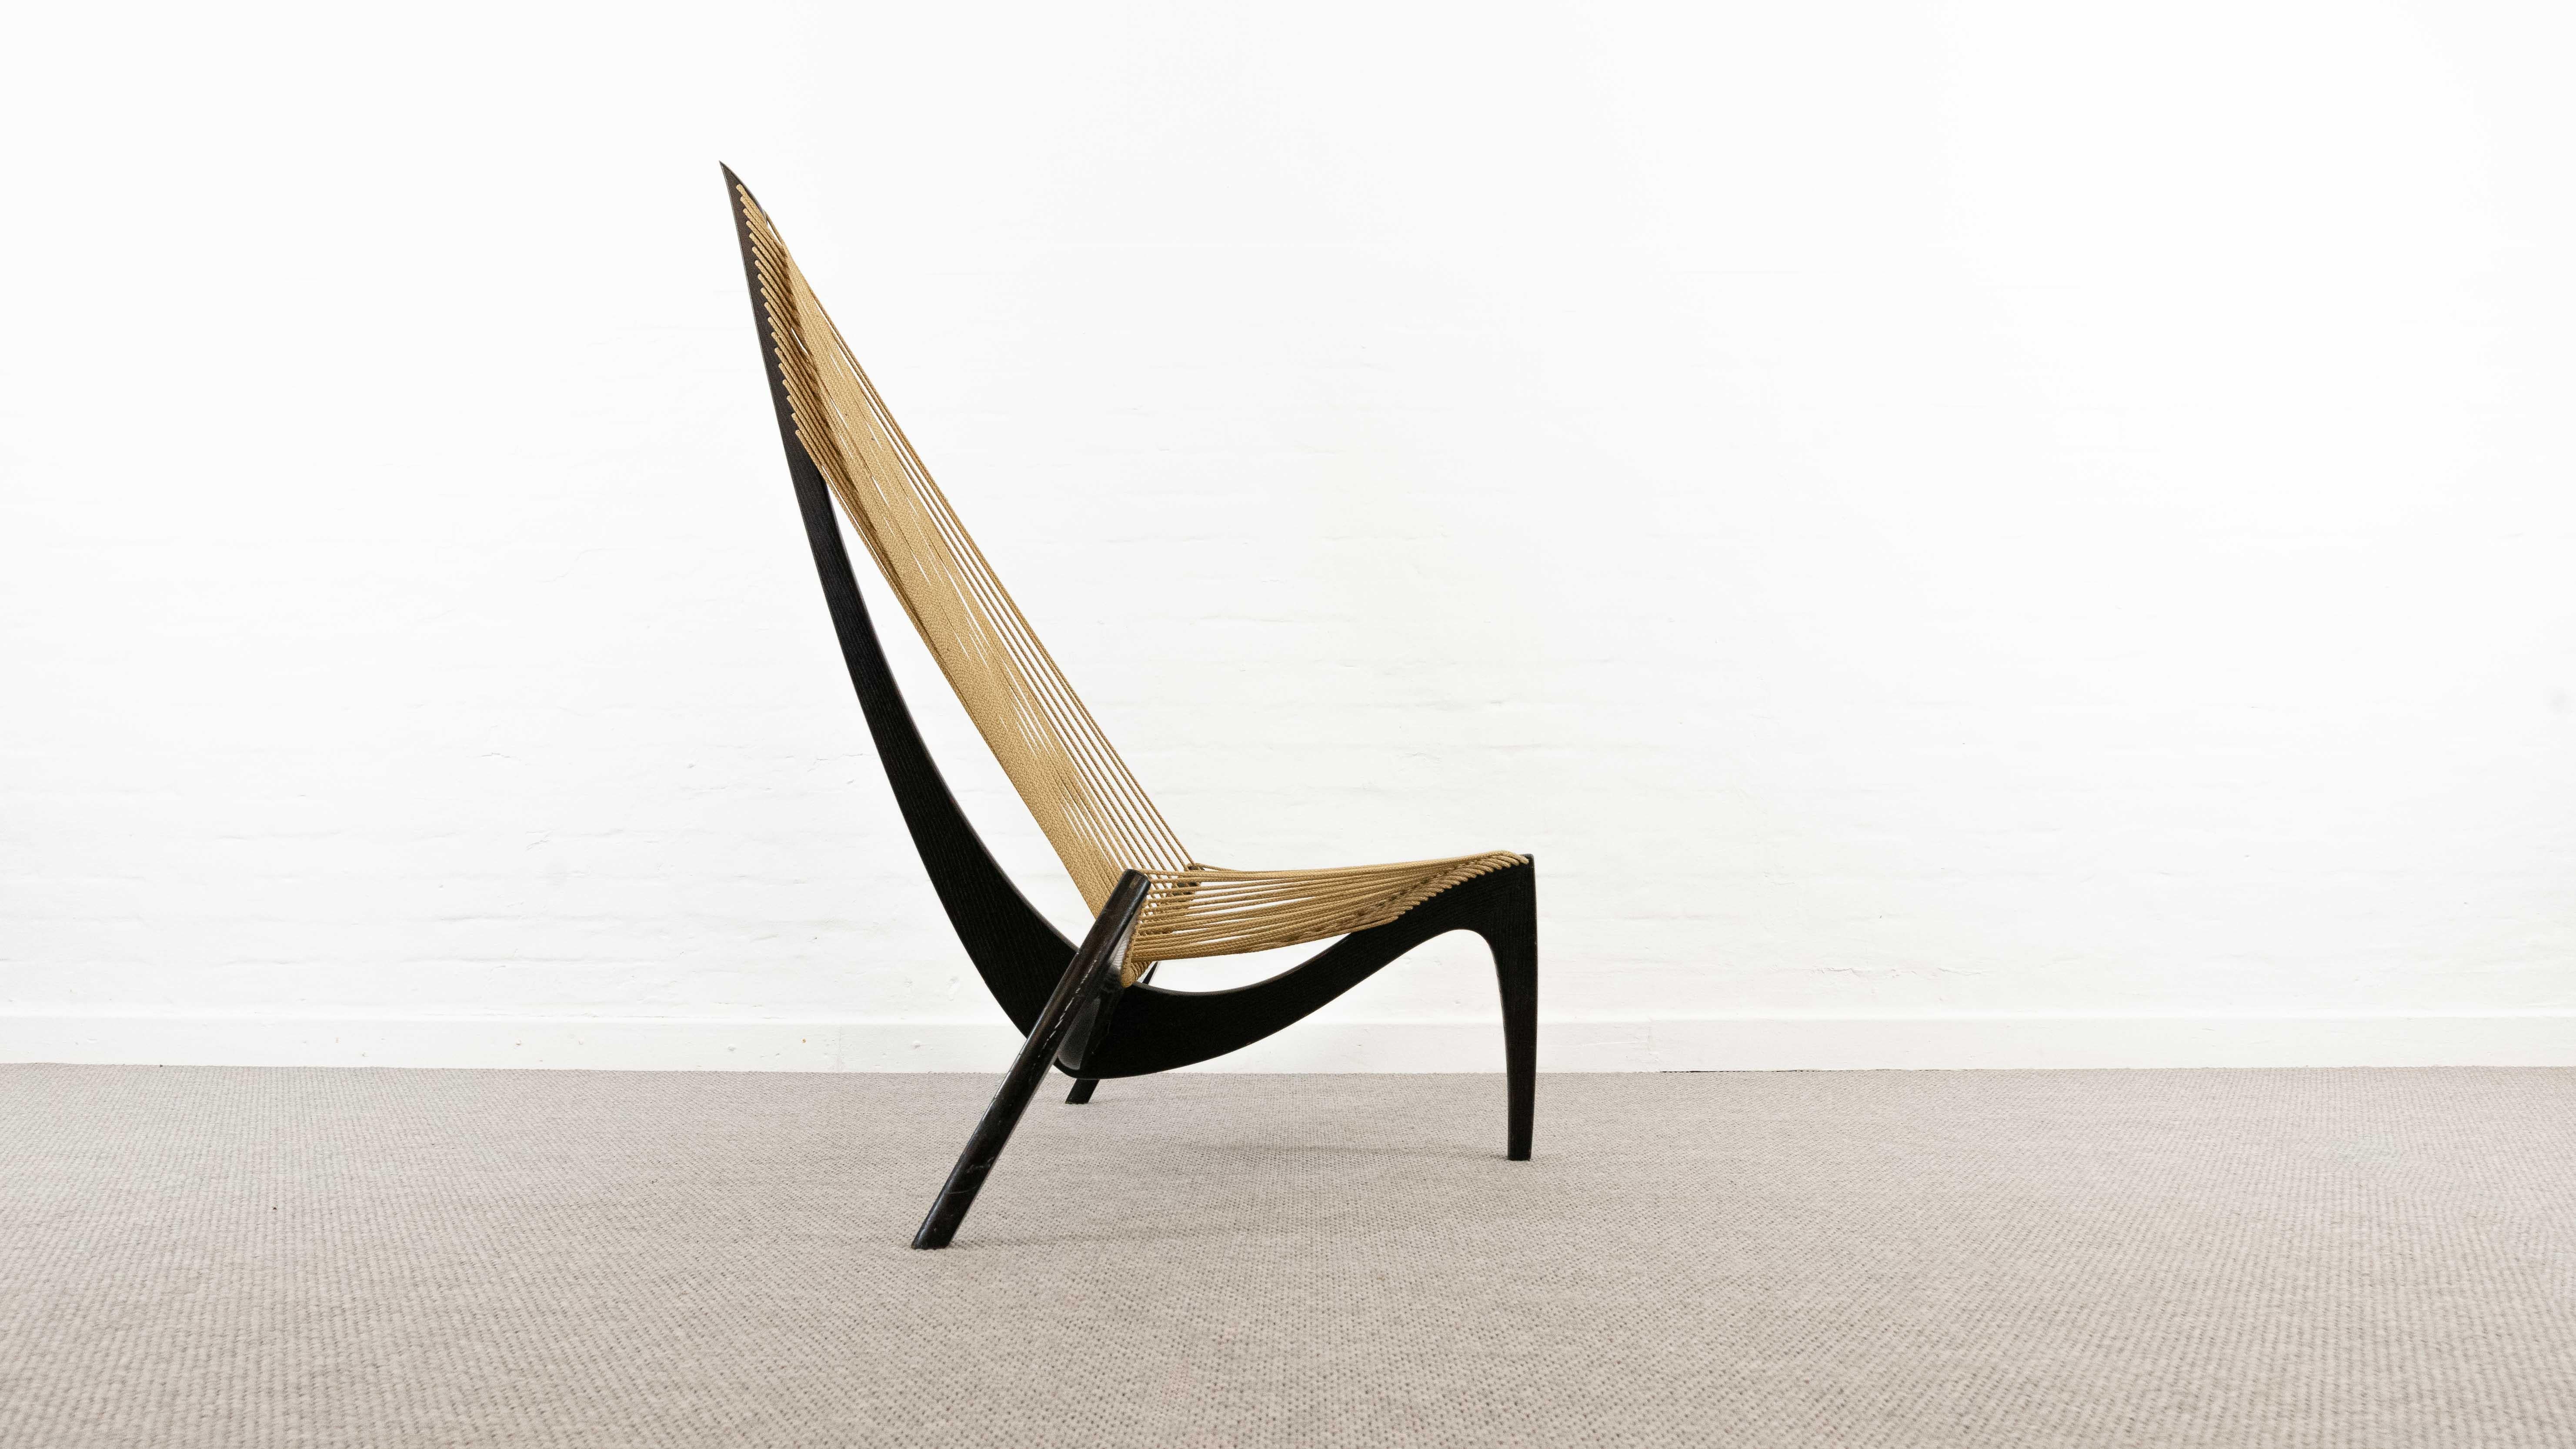 Vintage Harp chair designed by Jørgen Høvelskov 1968. Made of black lacquered ash wood and flag rope. The curves of the wooden legs refer to a ship’s bow from a Viking ship. The legs are joined with a single metal screw. Beautiful iconic seating